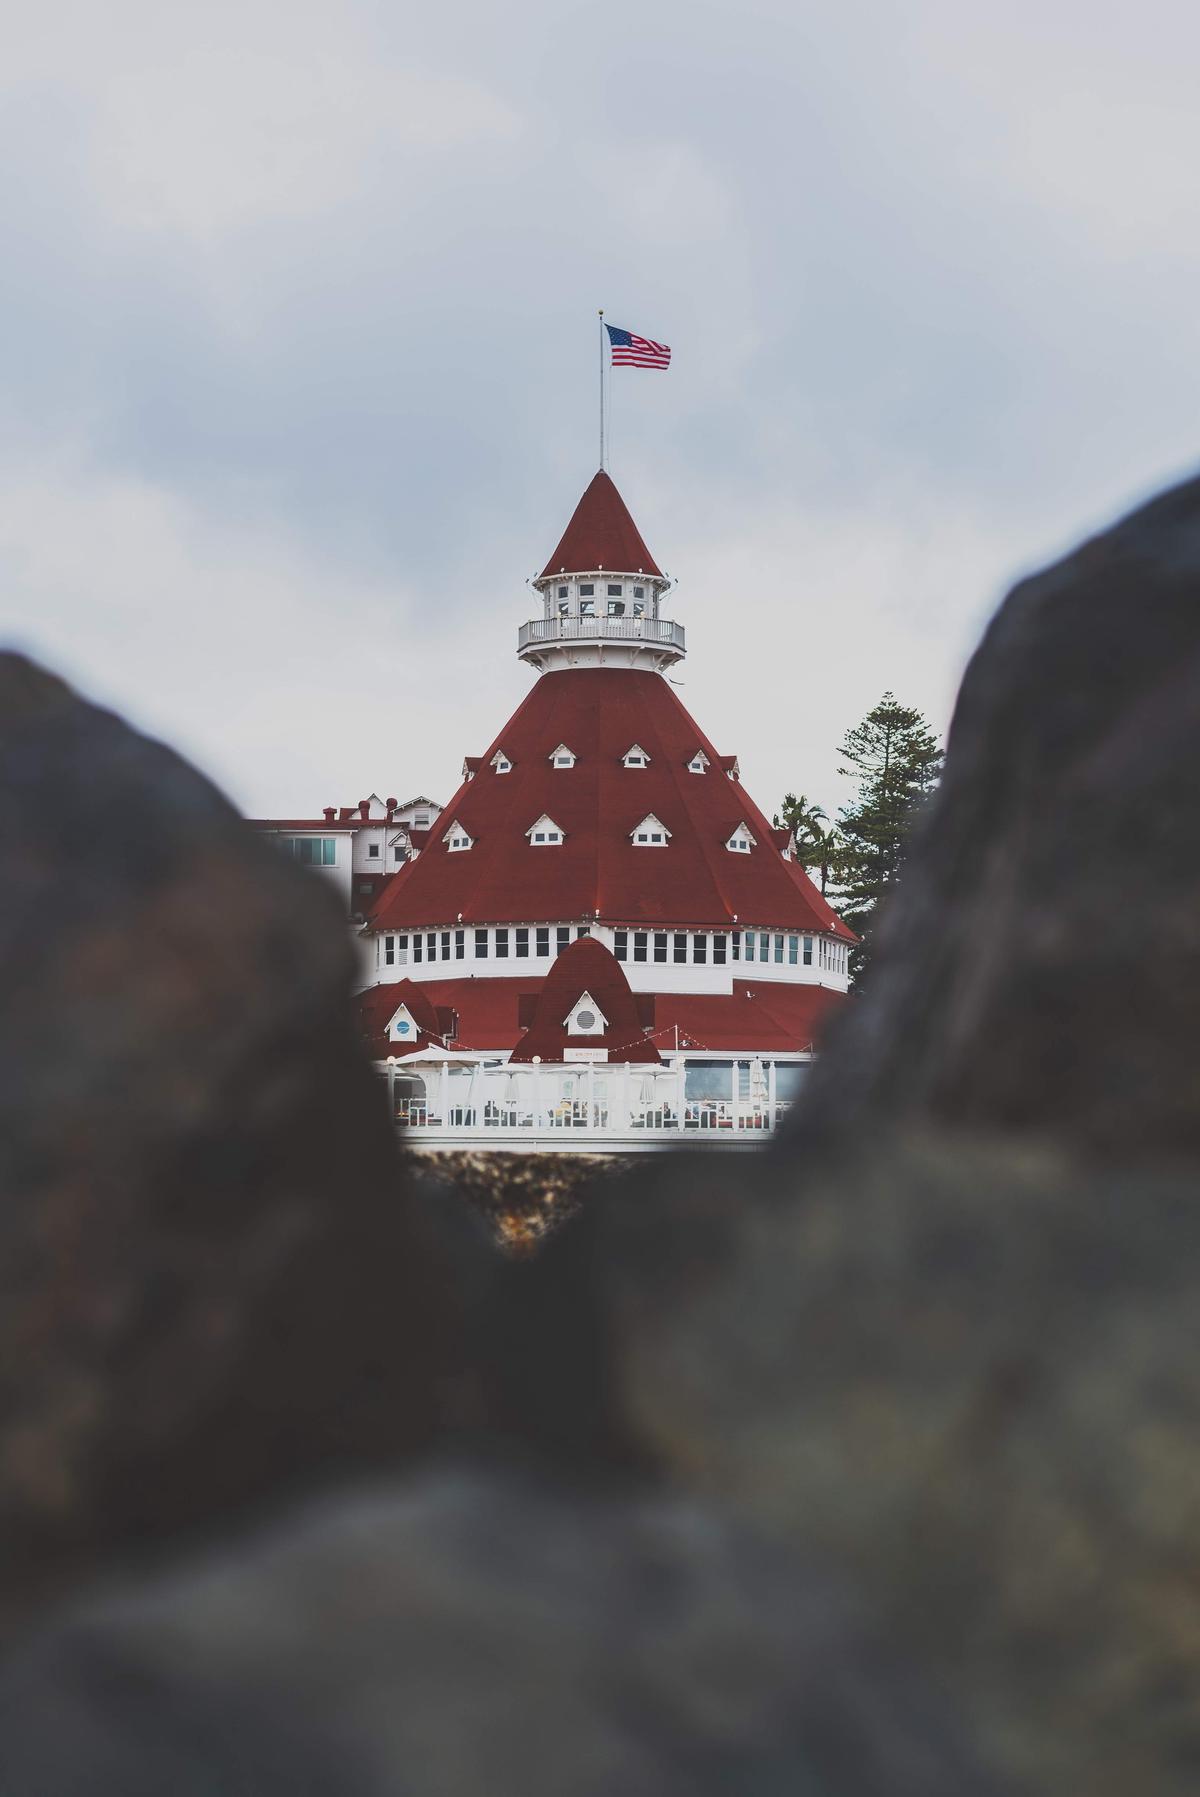 A family is enjoying the sun, sand, and waves on a wide and open beach. The beach's gentle waves provide a safe and enjoyable swimming experience for all. The iconic Hotel del Coronado sits in the background, offering a glimpse of Victorian splendor.